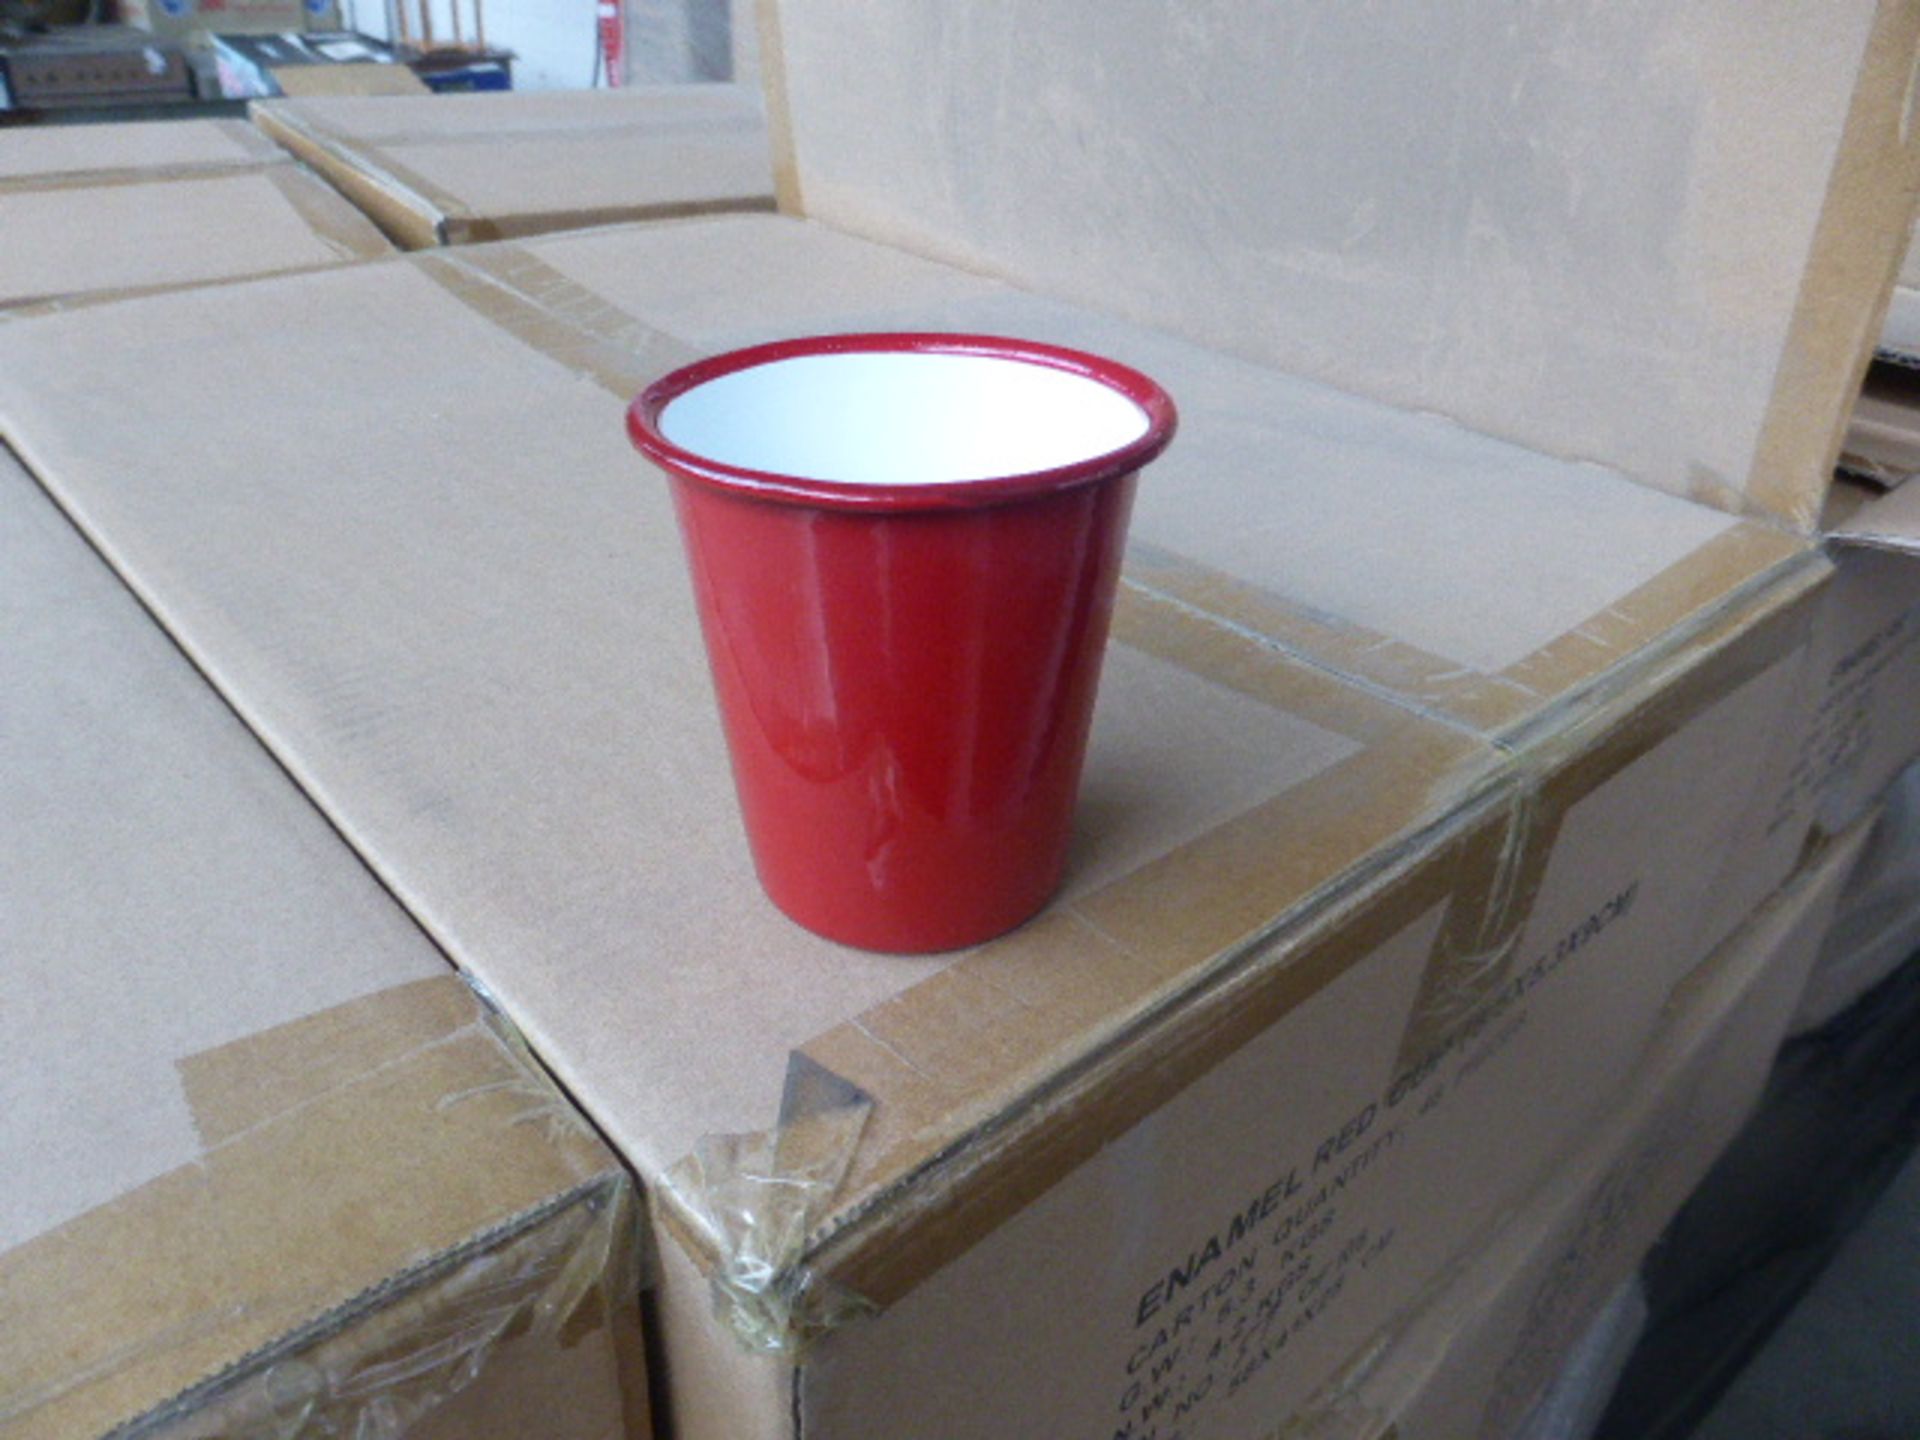 Box of 48 enamel red cups